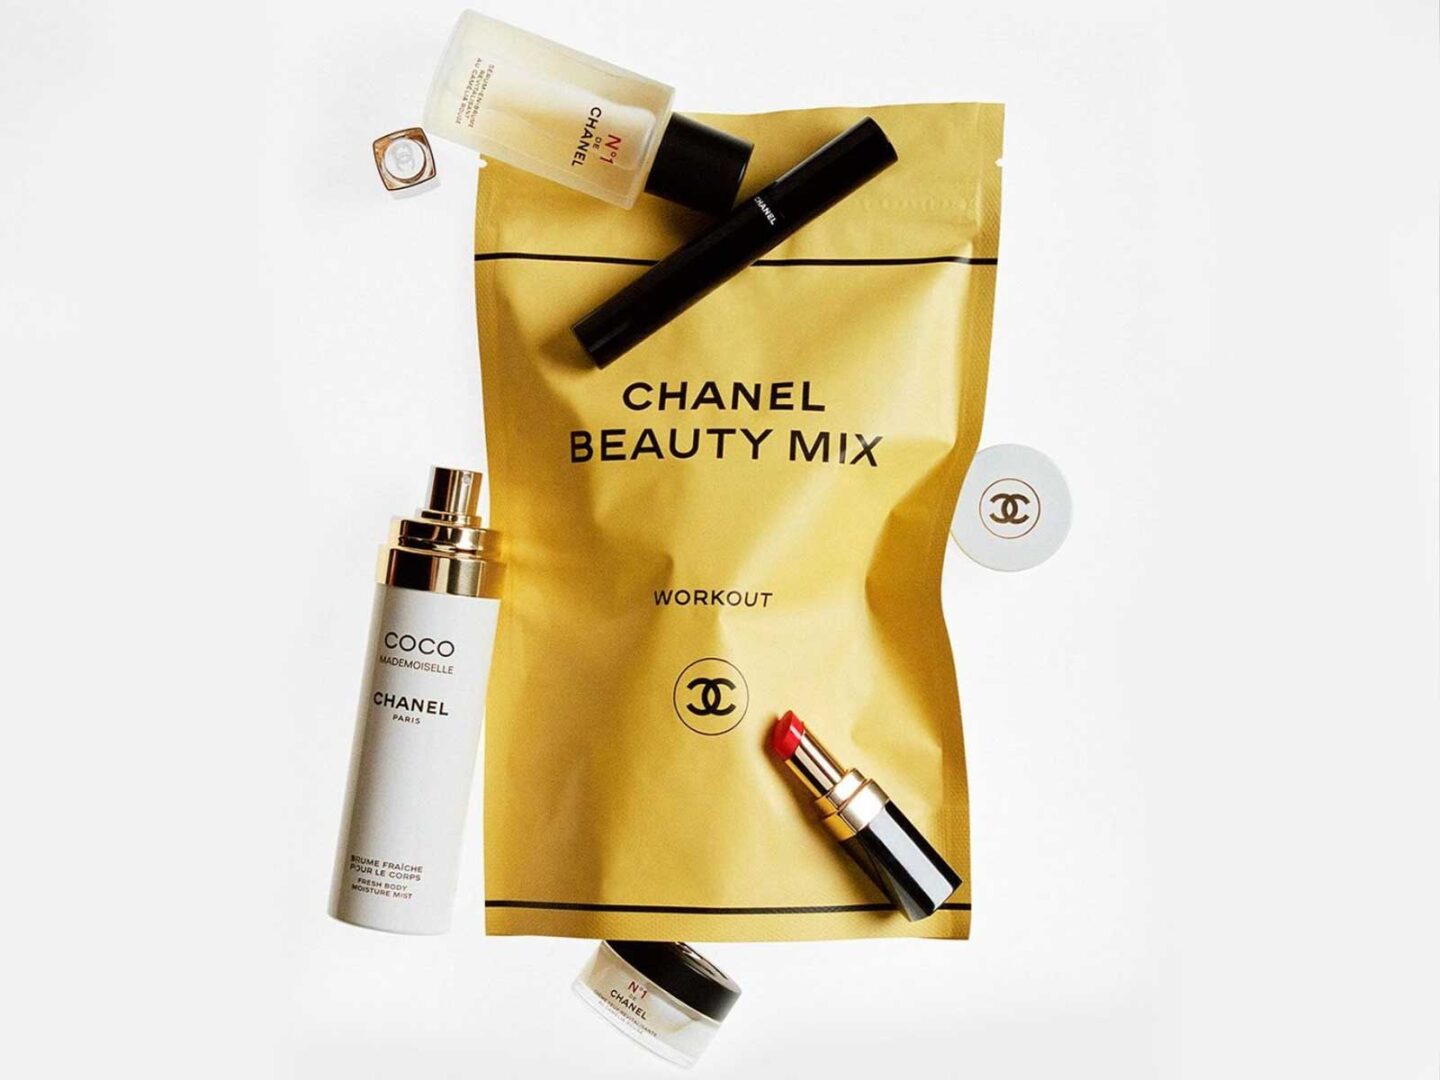 These are the Chanel Beauty essentials for your post-gym look